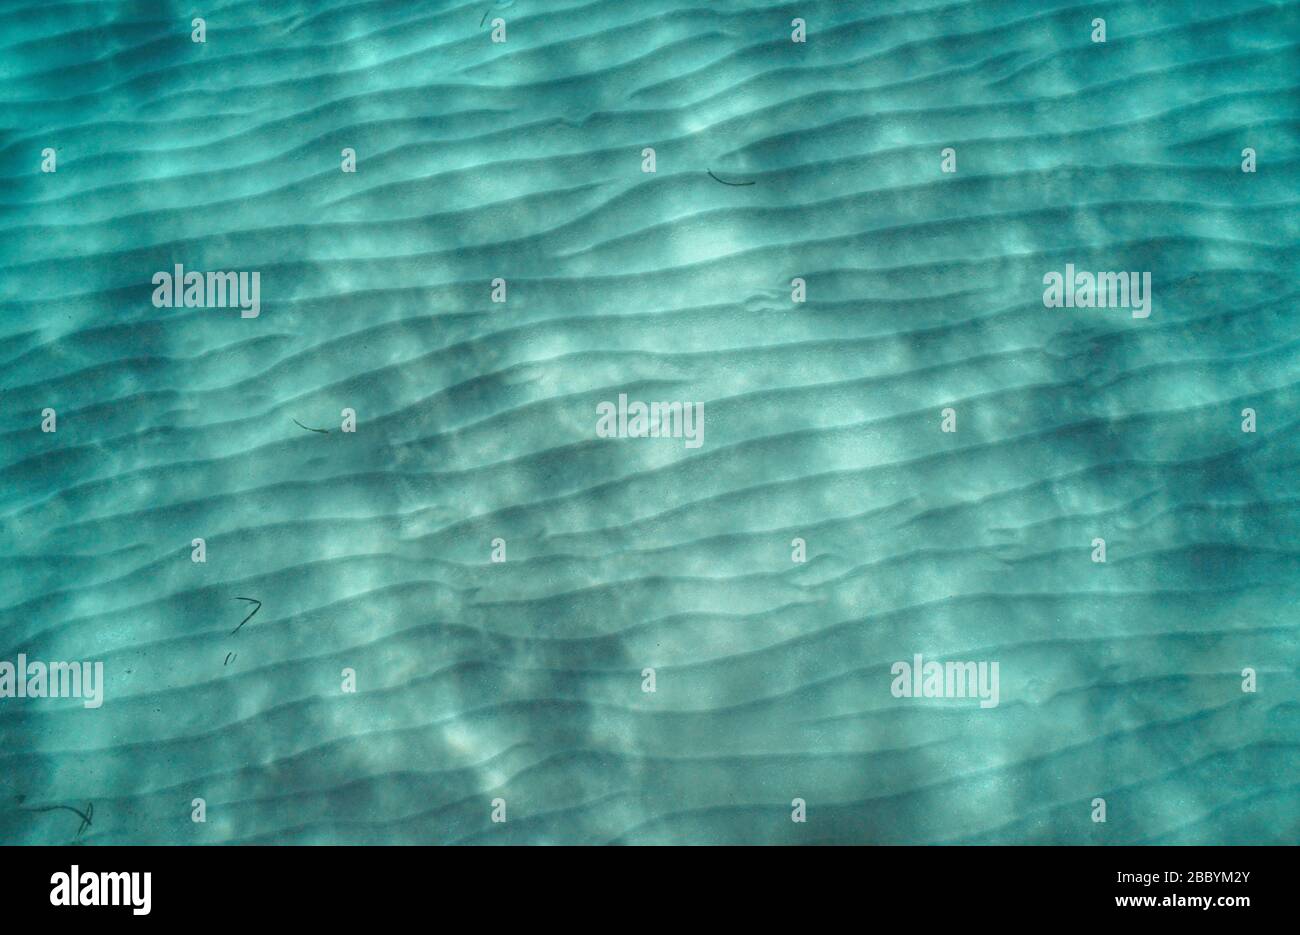 Sand ripples underwater on the seabed seen from above, natural scene, Mediterranean sea Stock Photo